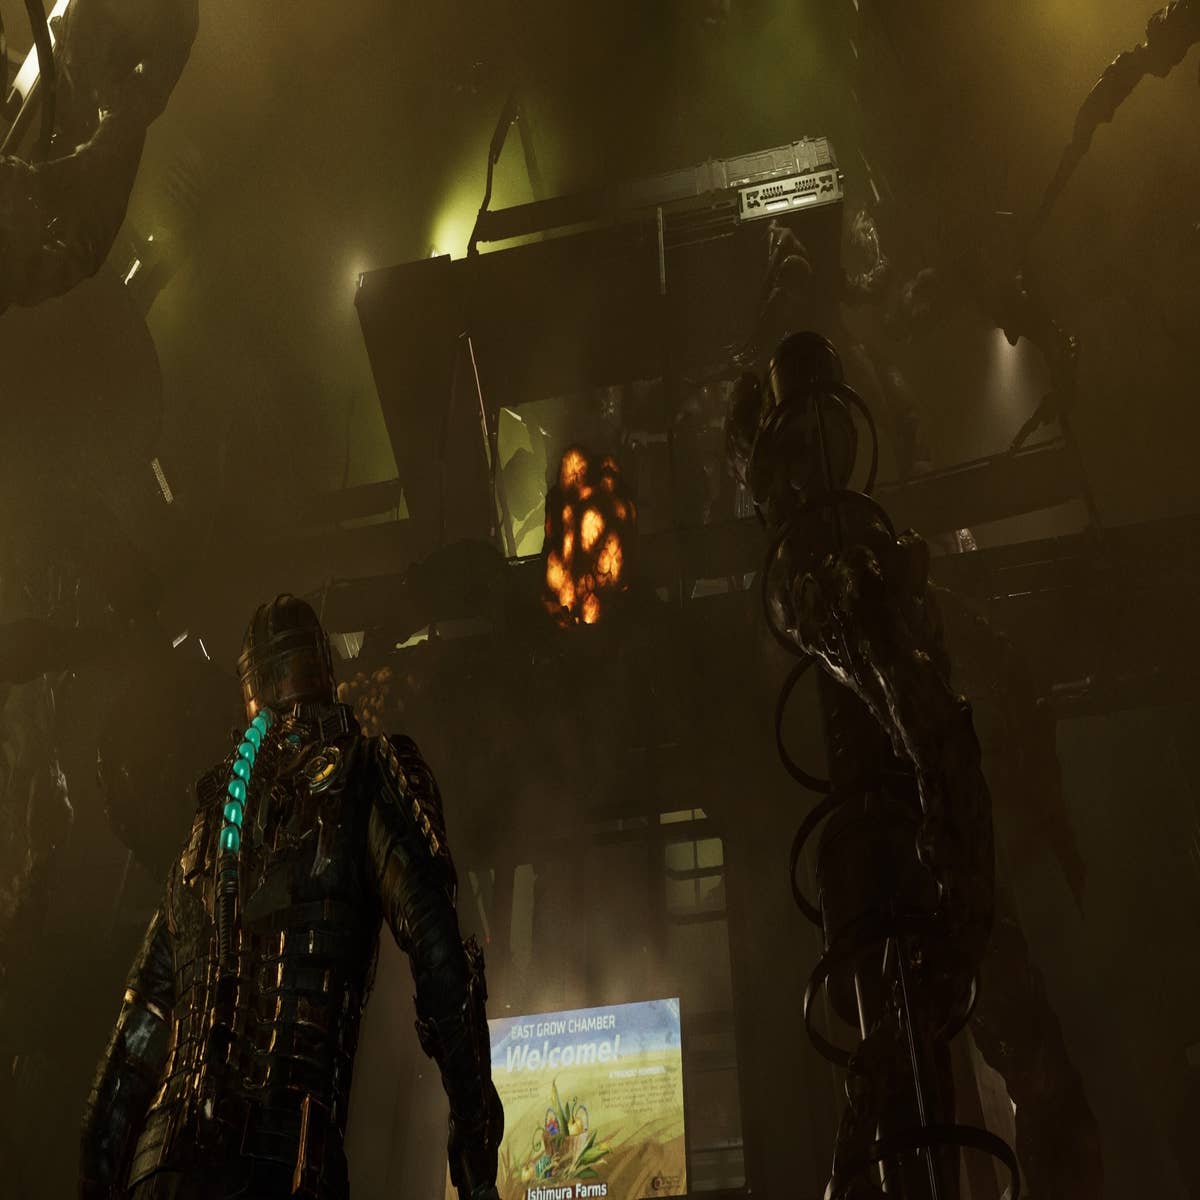 Dead Space Master Override and all Crew Rig locations